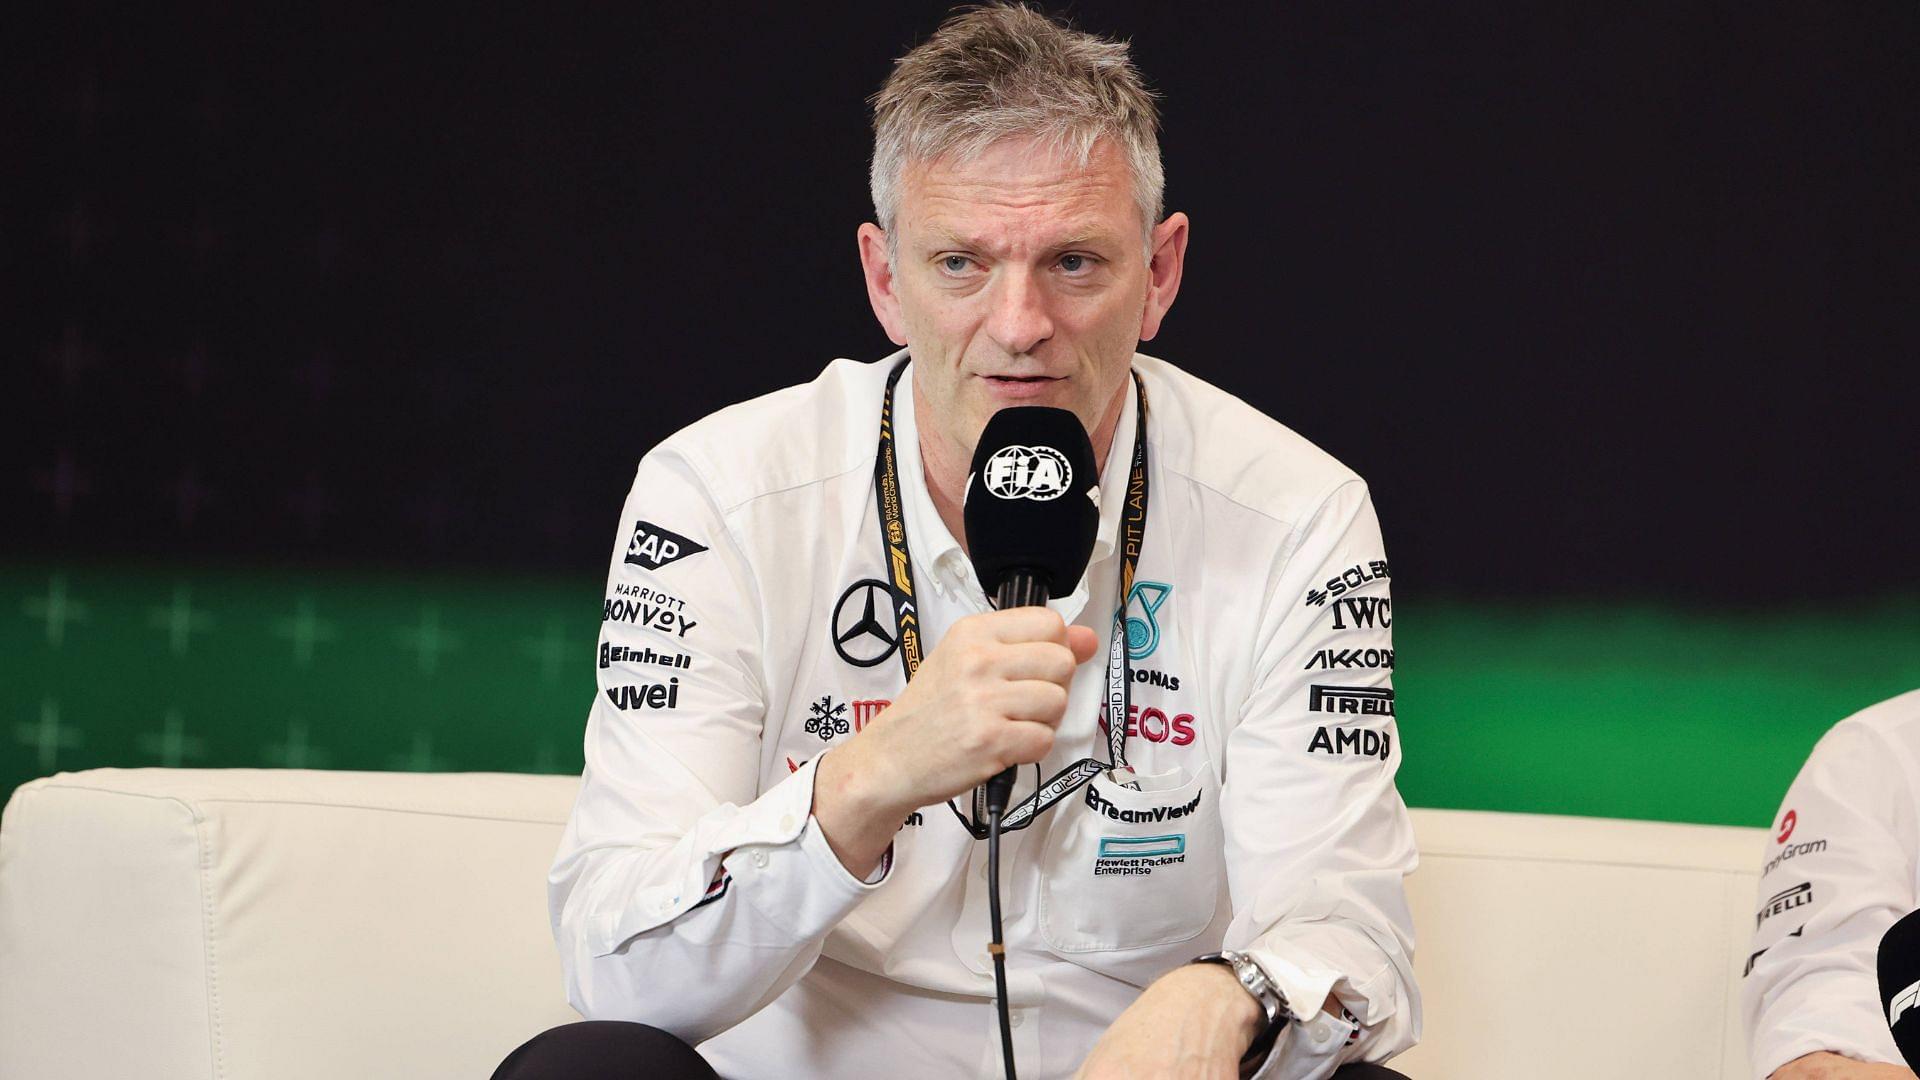 James Allison Reveals Why Mercedes Remained ‘Dumb’ While Solving Their Problems Under Current Regs